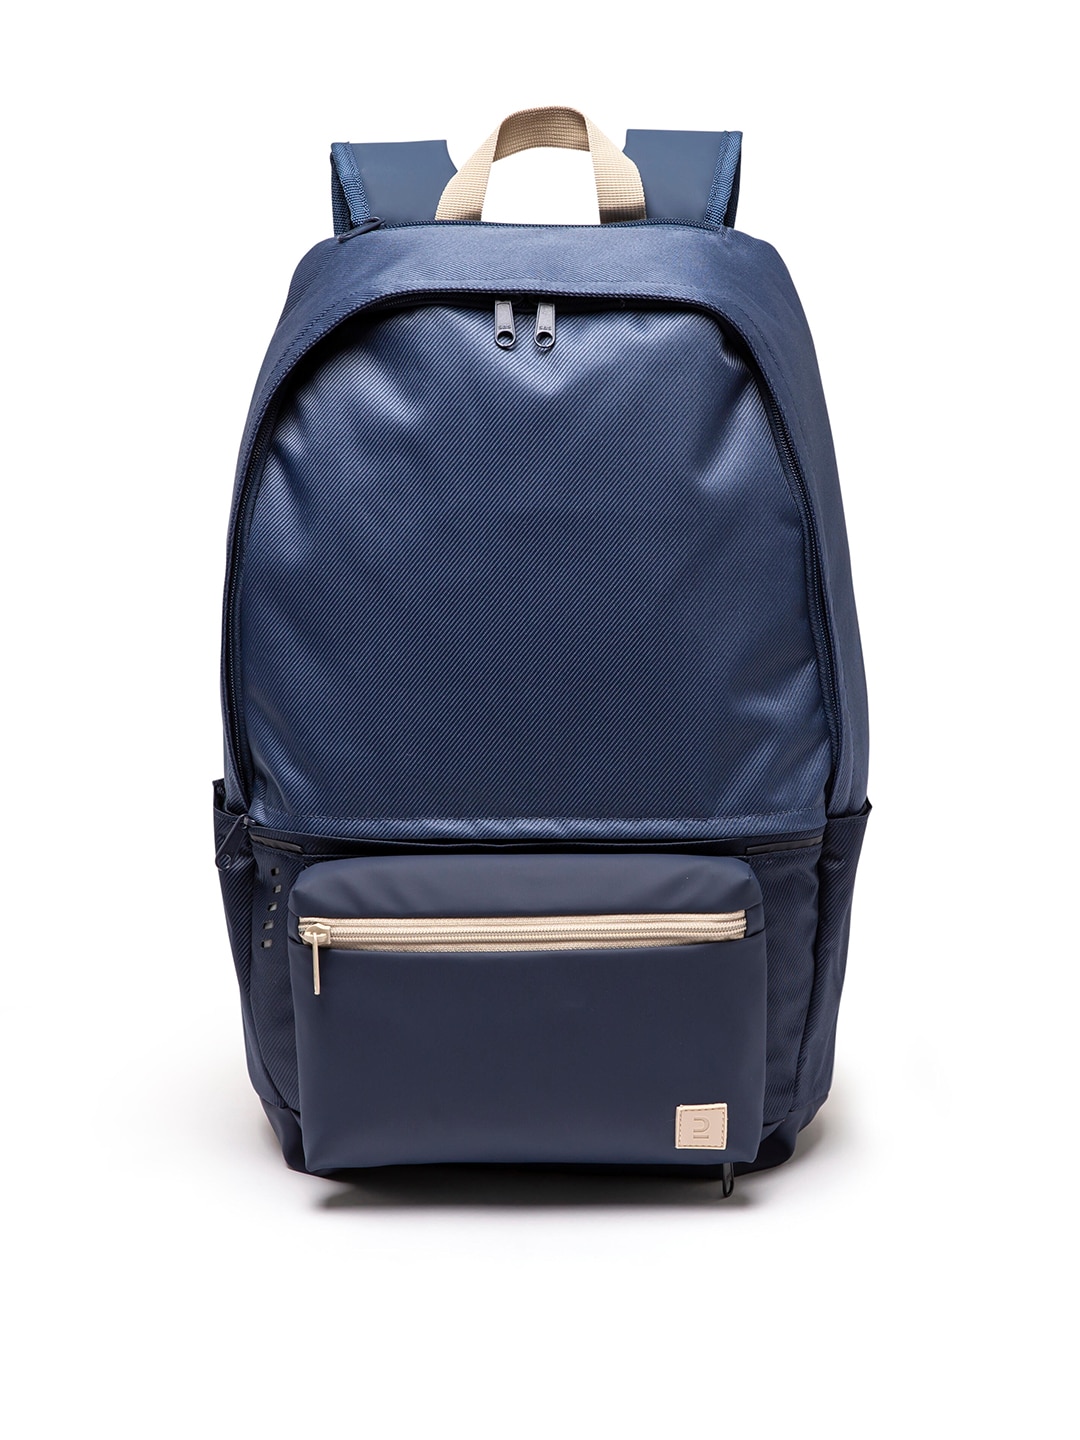 Kipsta By Decathlon Unisex Blue Backpack Price in India